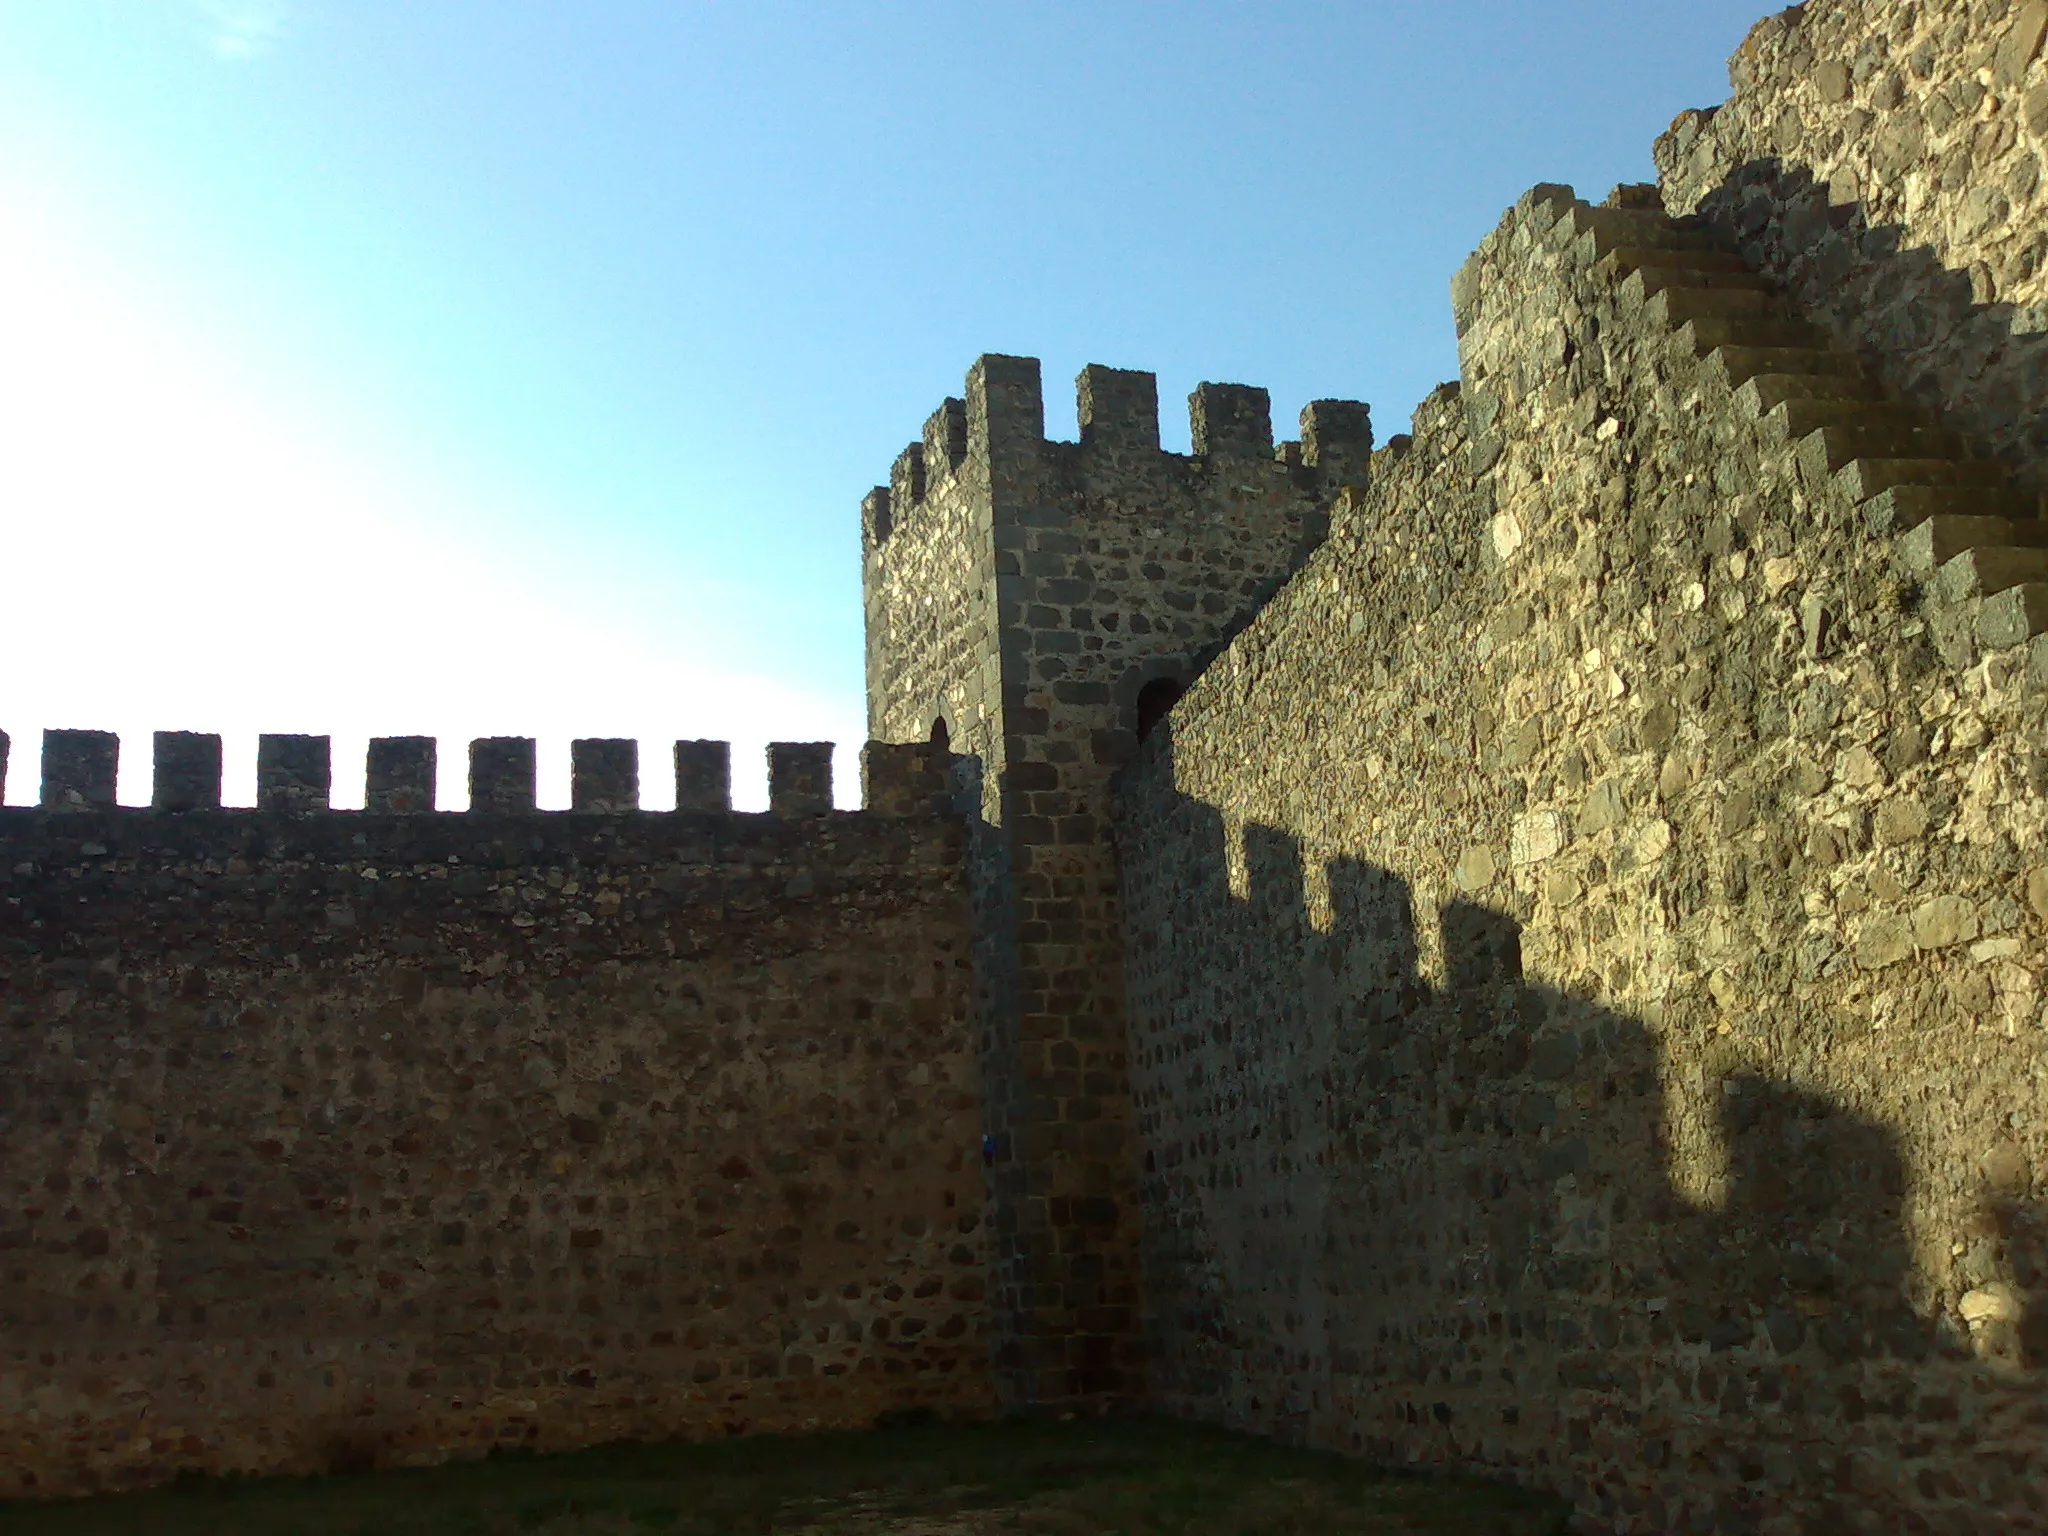 Photo showing: Tower of the Amieira castle, Amieira do Tejo, Nisa, Portugal (the file name is incorrect).